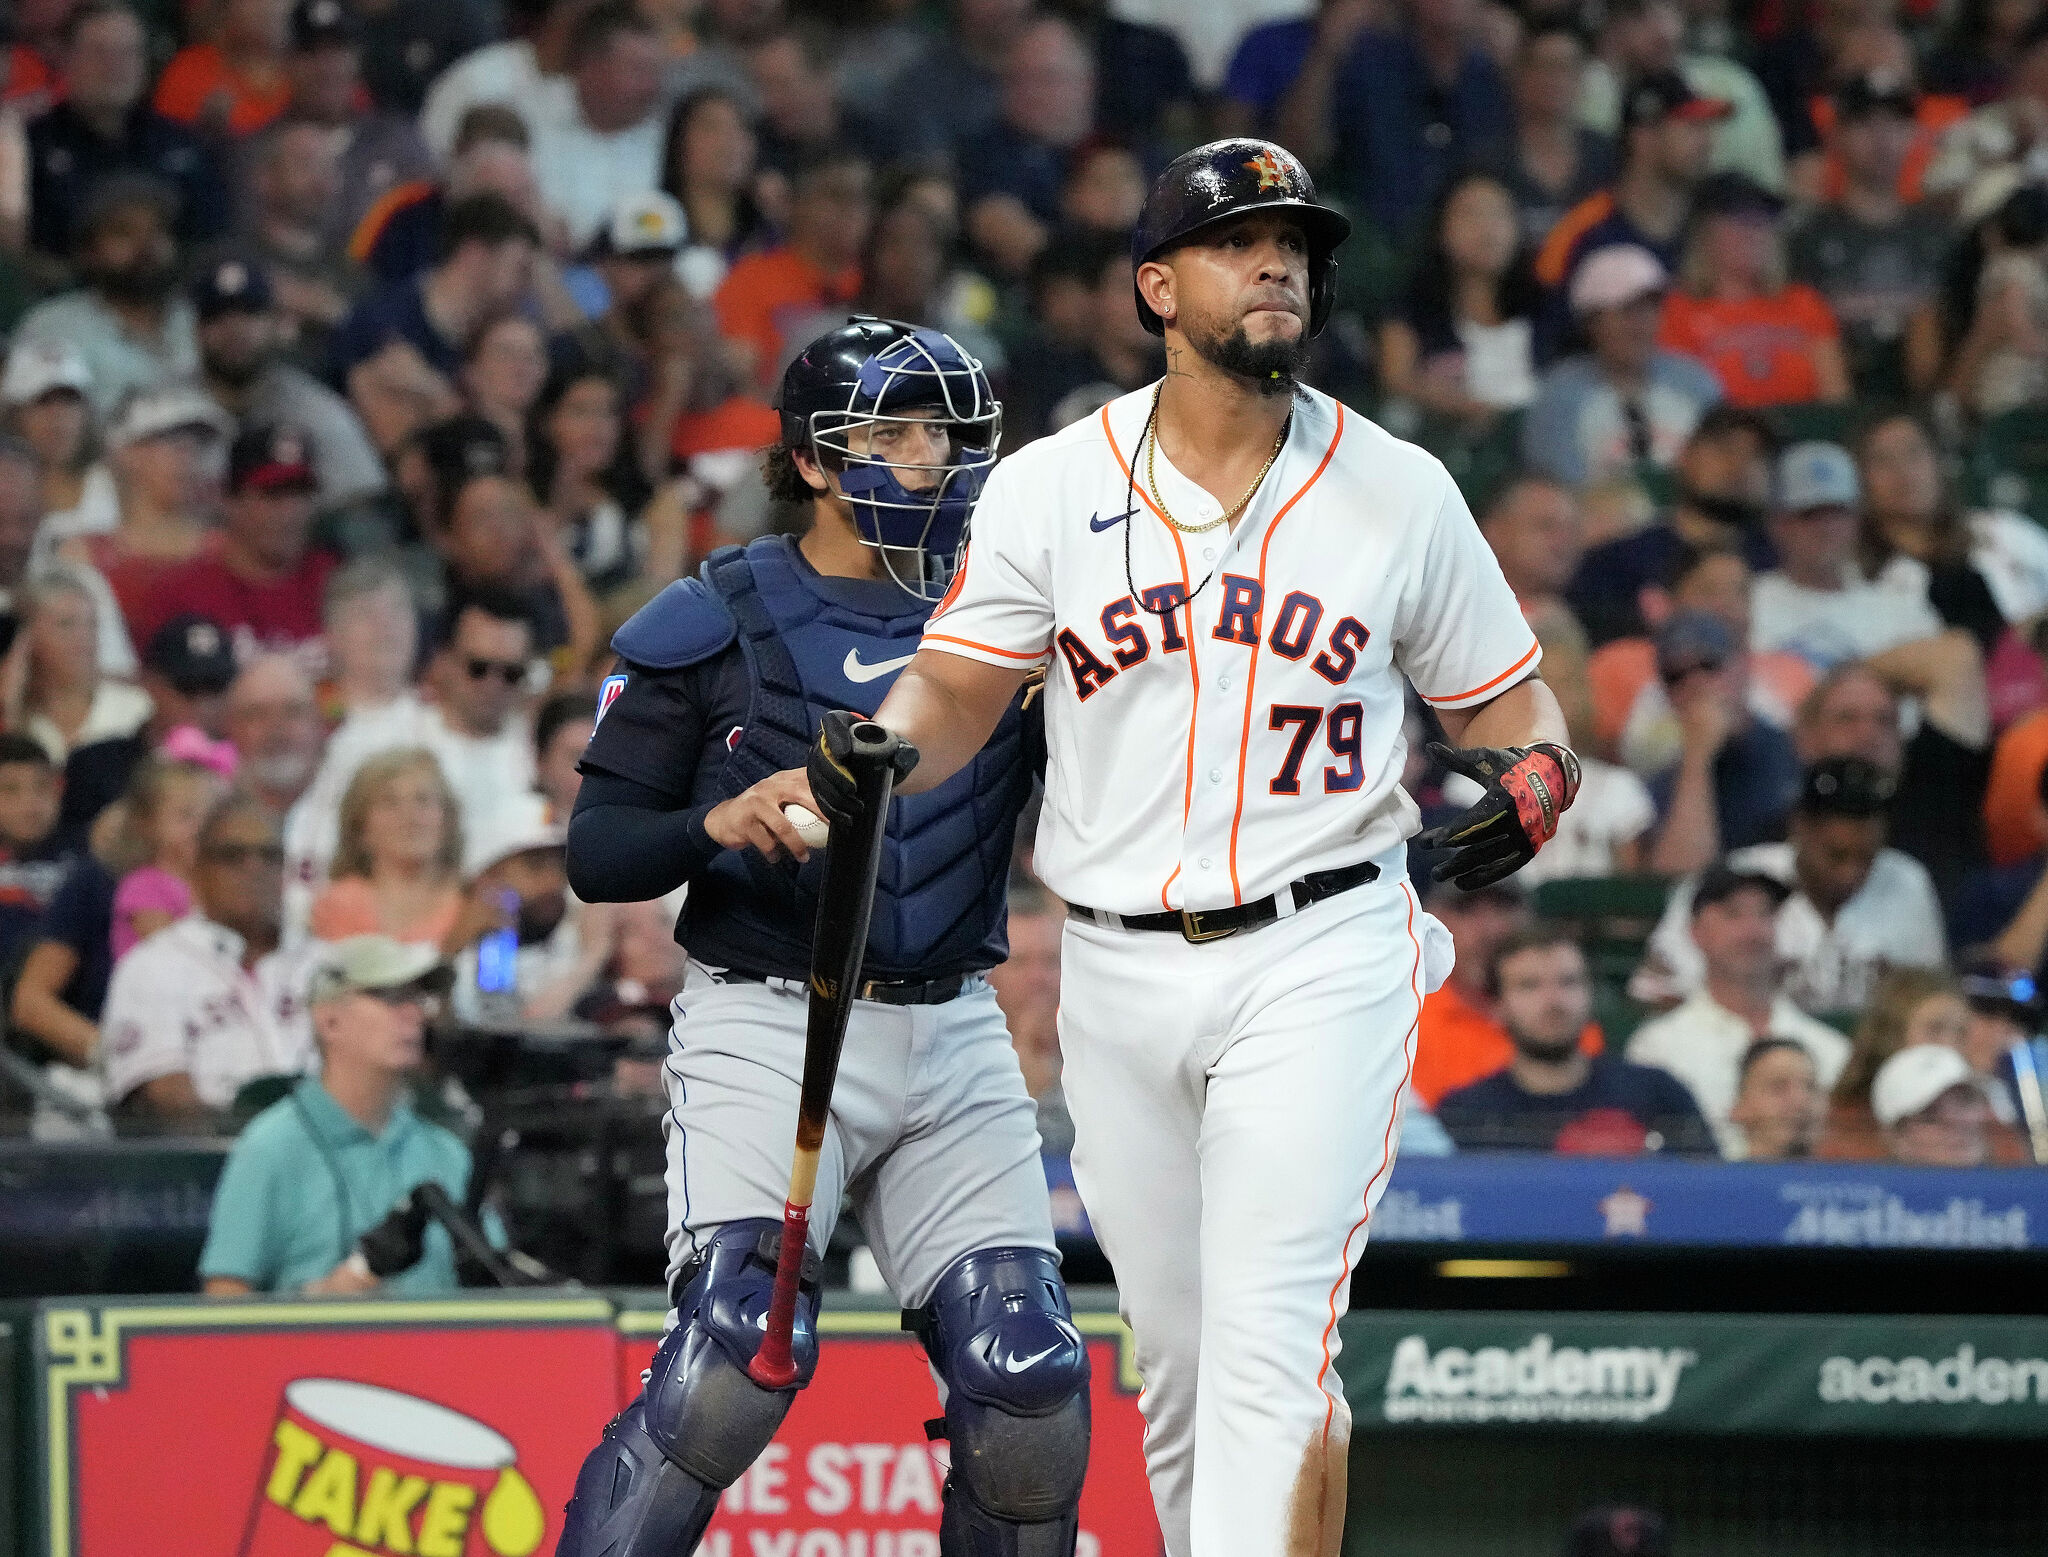 As Jose Abreu struggles, will Astros make changes at first?